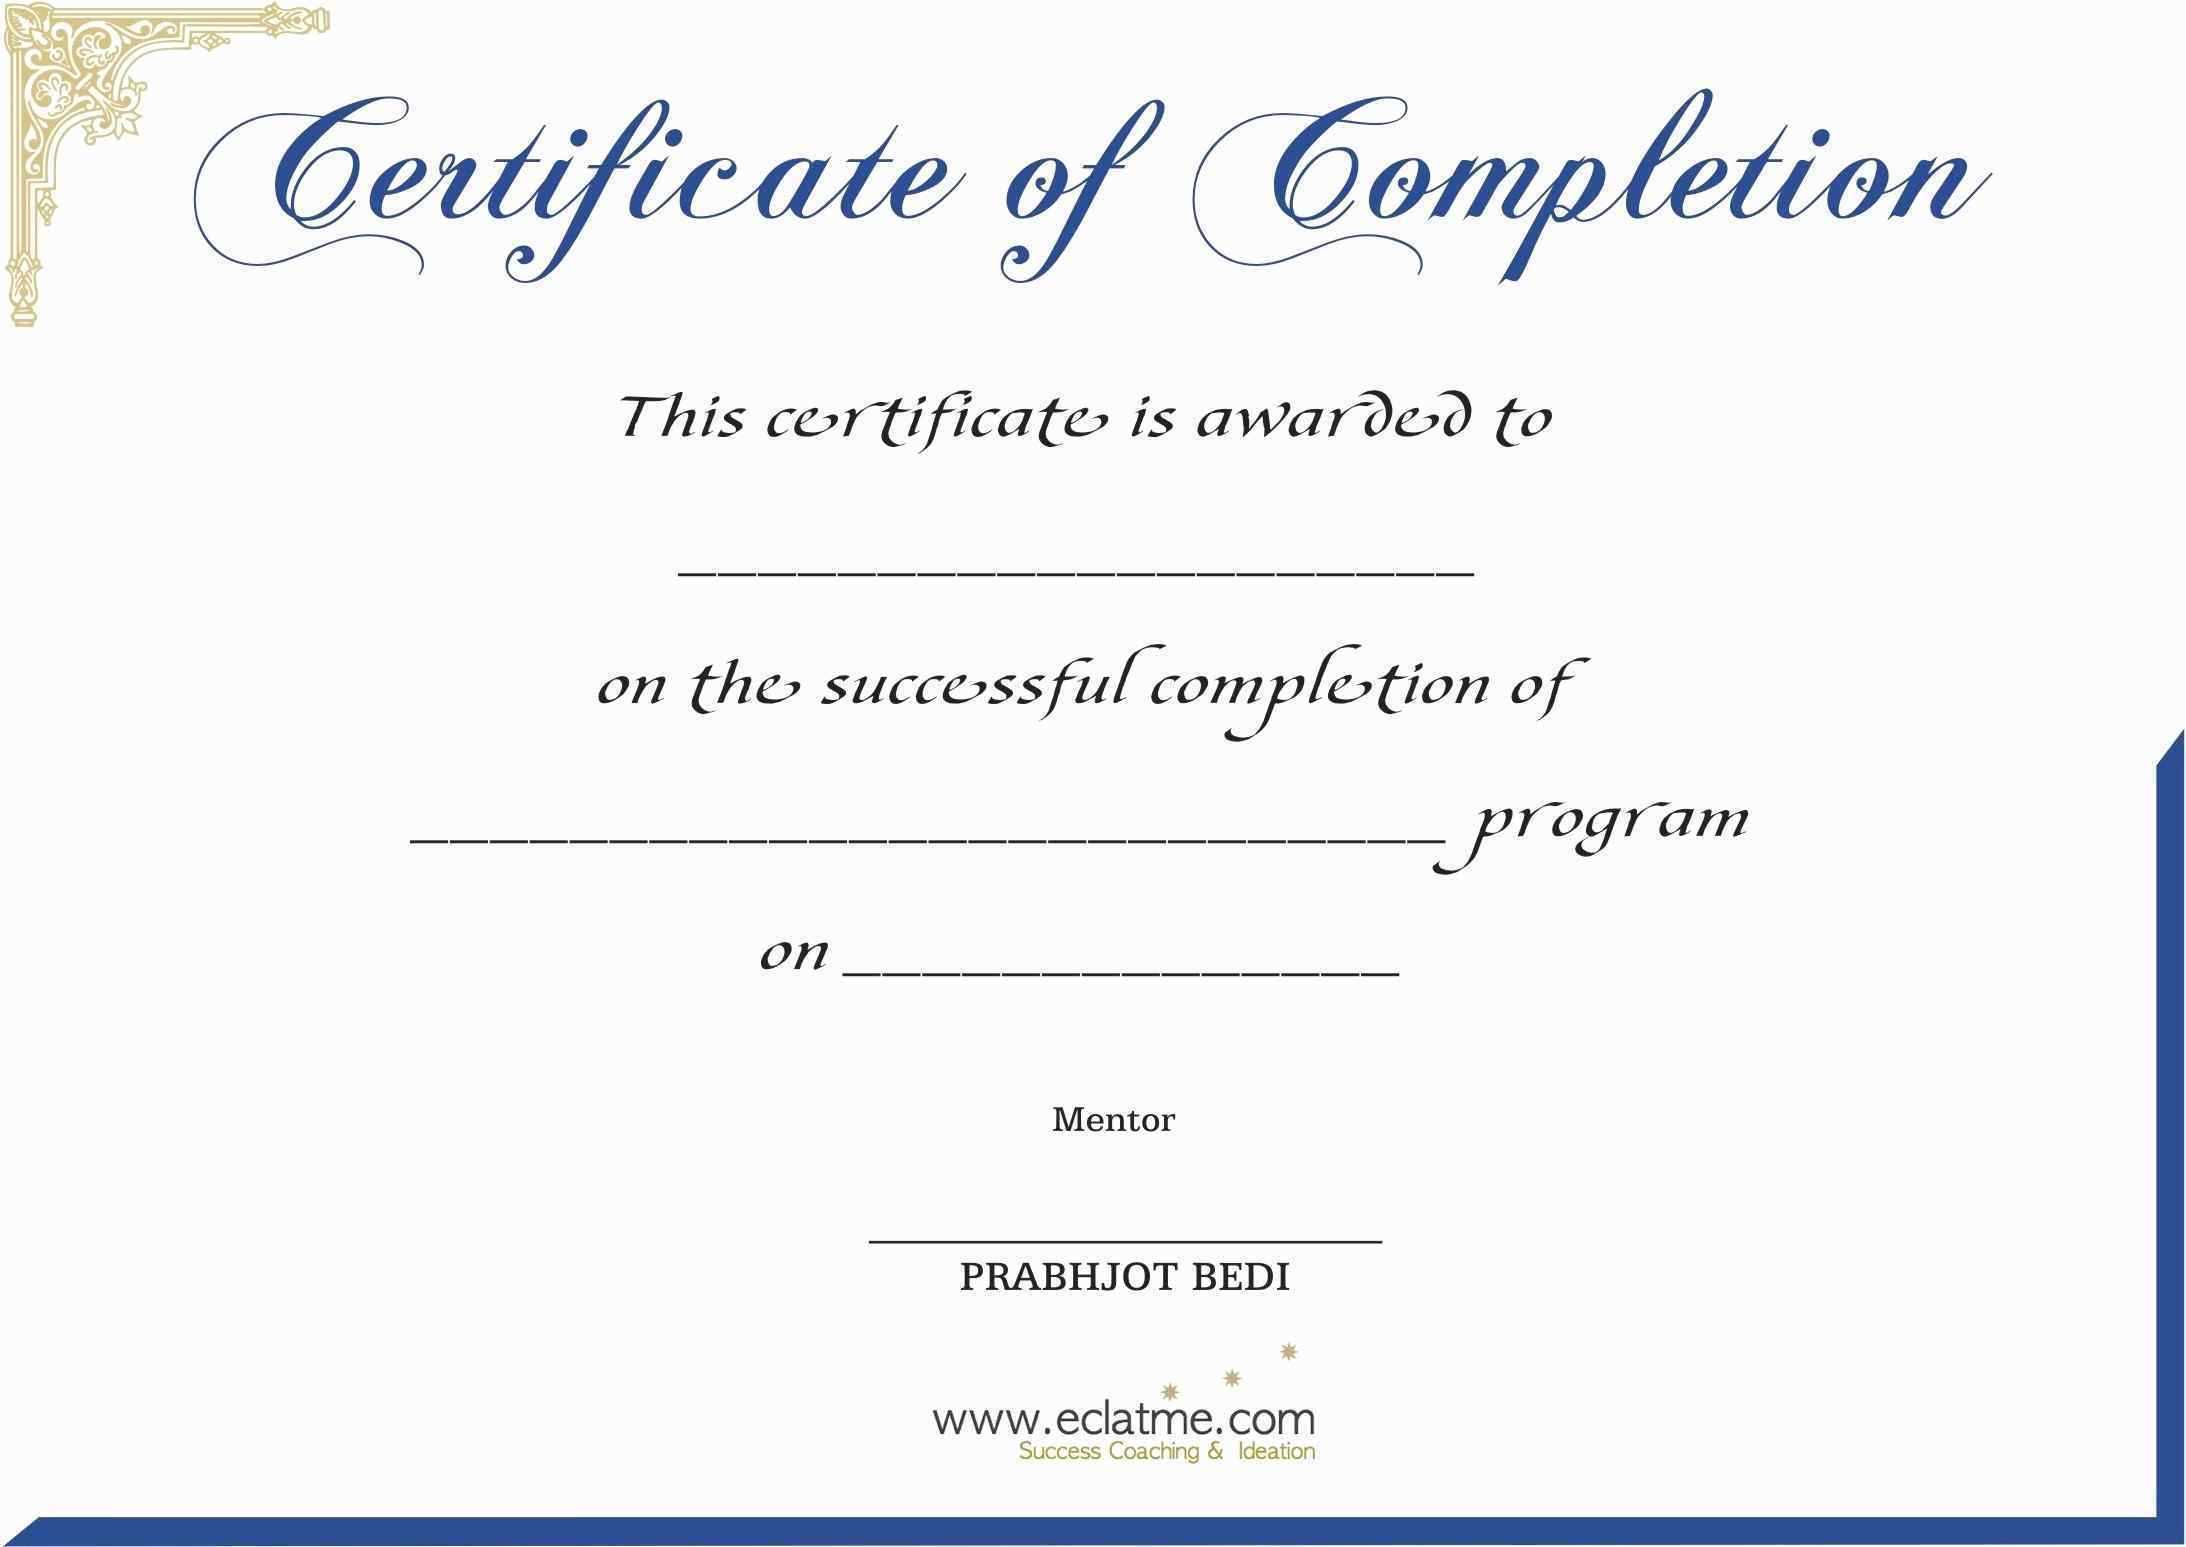 Certificate Of Completion Templates Free Printable Luxury In With Certificate Of Completion Template Free Printable